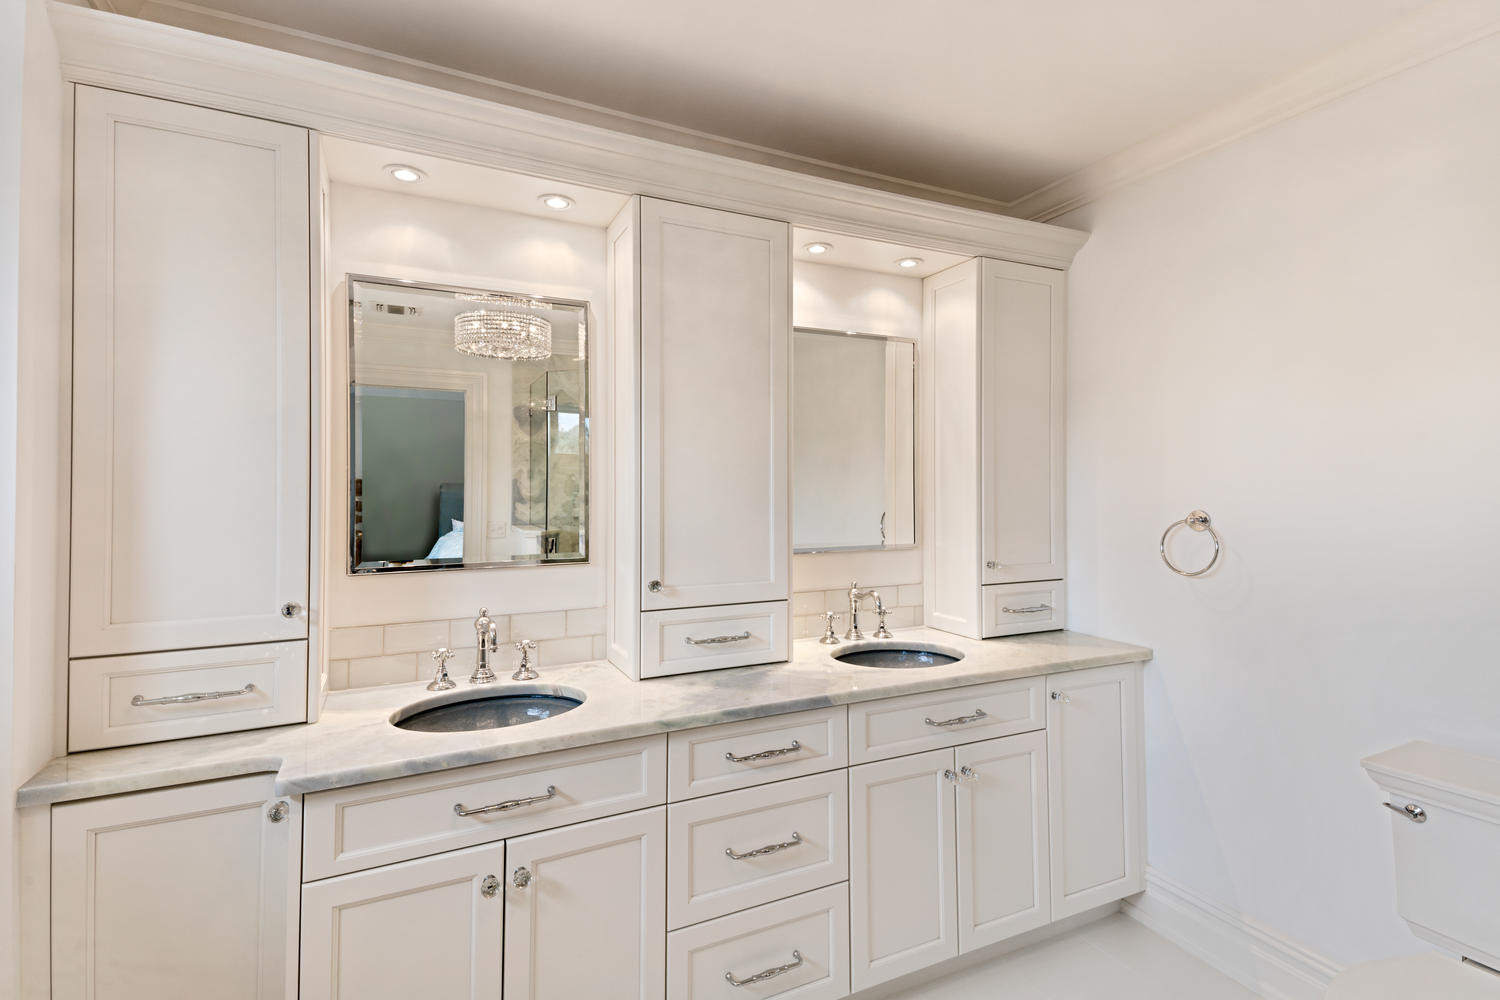 Master Bathroom Cabinets
 Bath Vanities Monmouth County New Jersey by Design Line